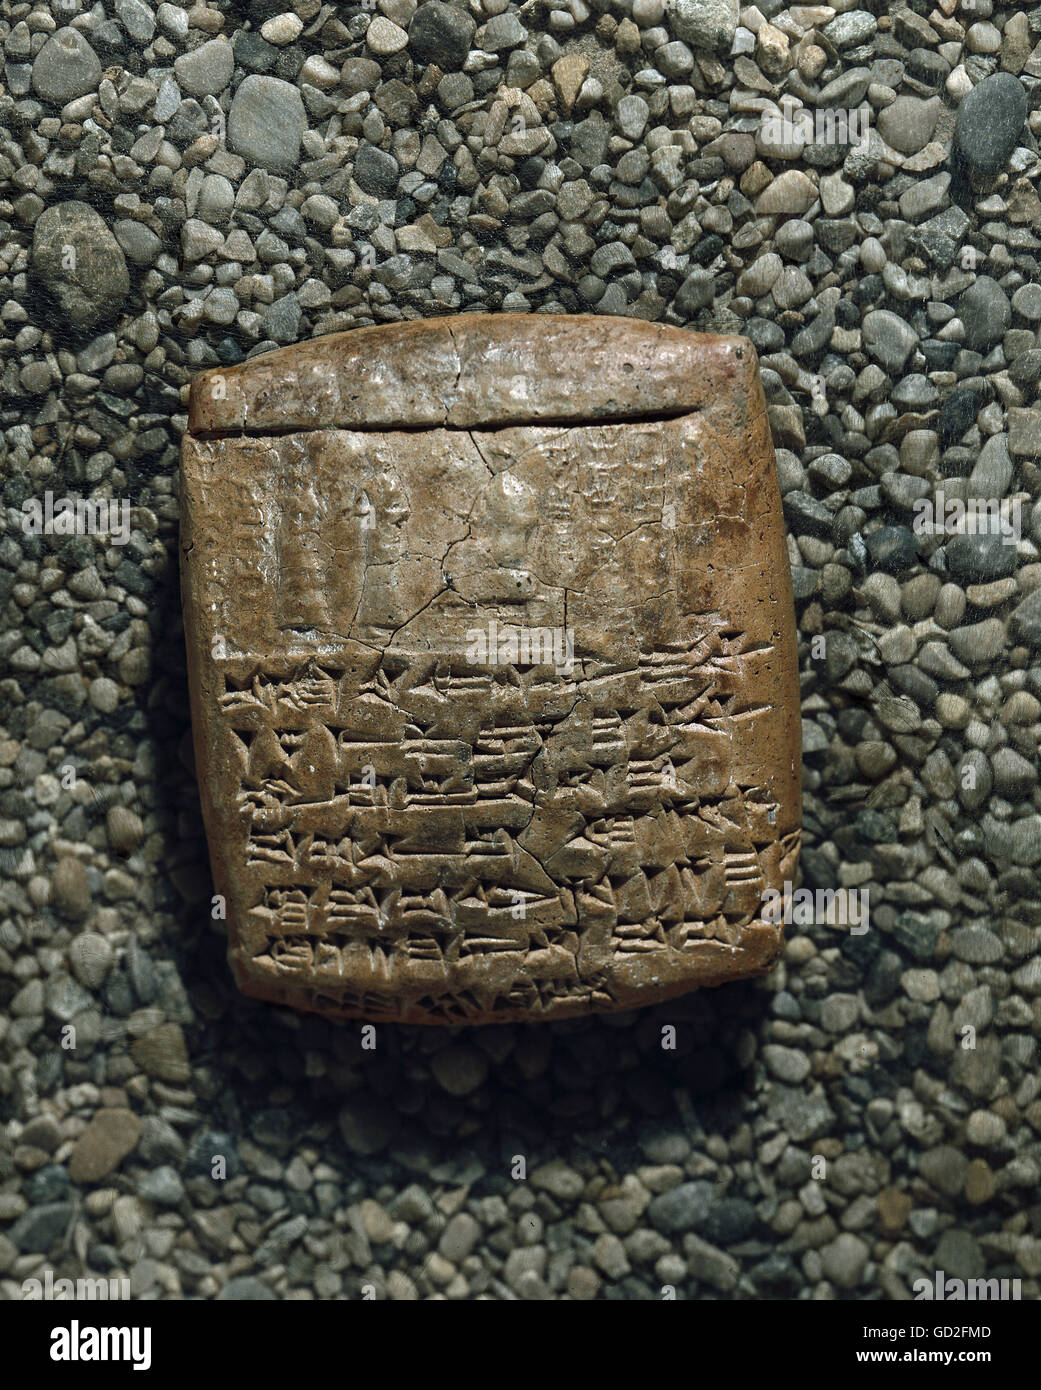 writing, script, cuneiform script, Ugarit, sale contract for a property from King Niqmepa V to his servant Amanichu, burned clay, circa 1300 BC, National Museum, Damascus, Syria, document, documents, trade, sale, sales, land, property sale, real estate, Mesopotamia, Bronze Age, clay tablet, historic, historical, ancient world, Additional-Rights-Clearences-Not Available Stock Photo